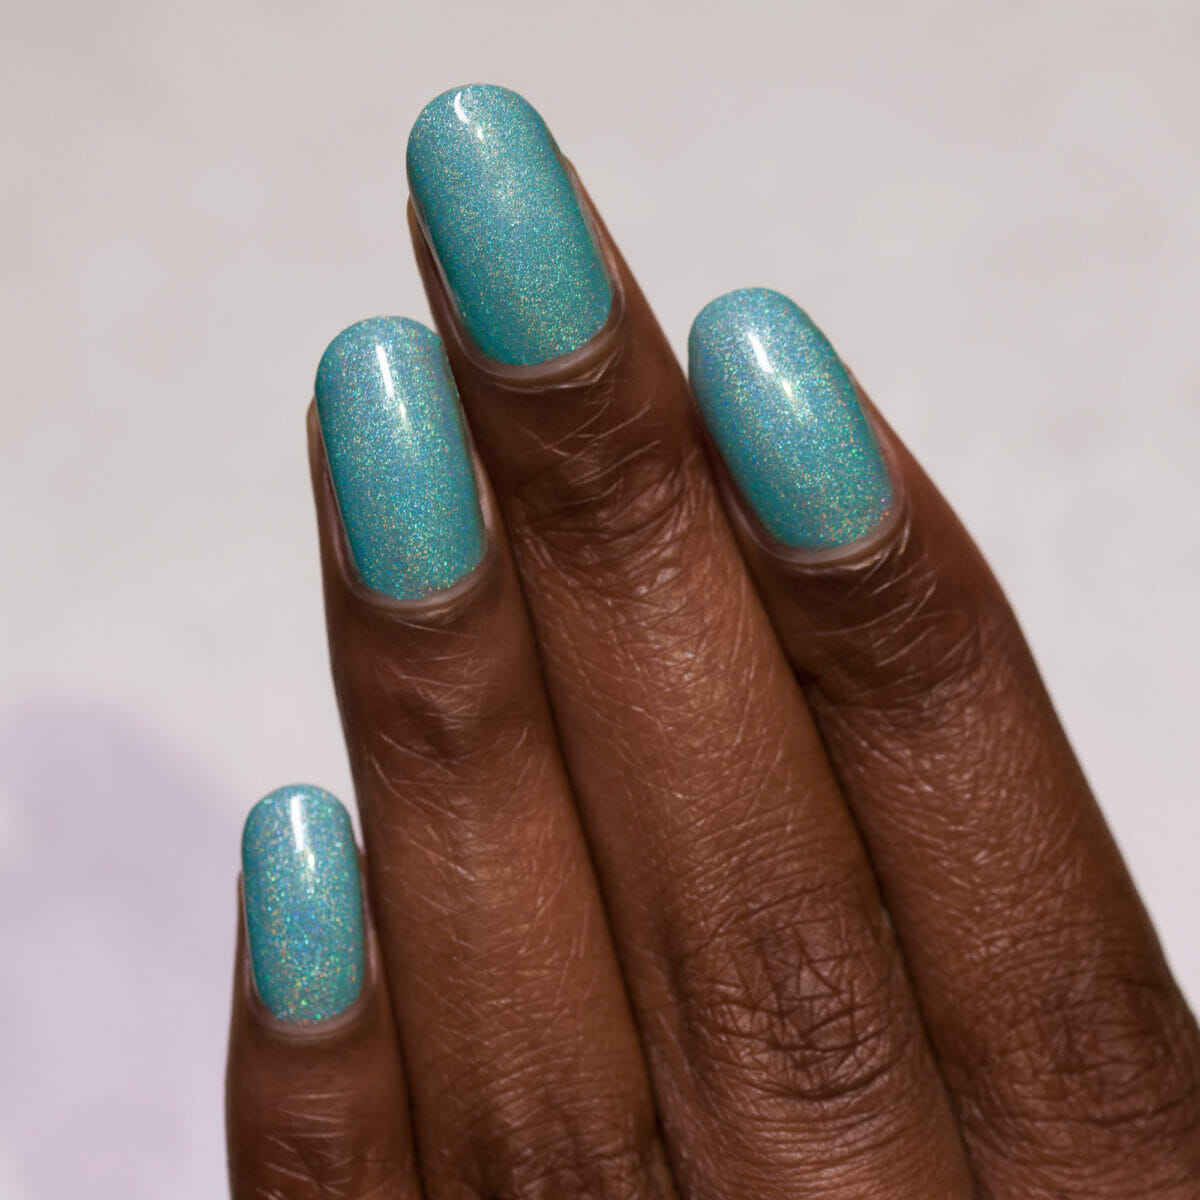 Music Box - Teal Blue Holographic Nail Polish by ILNP